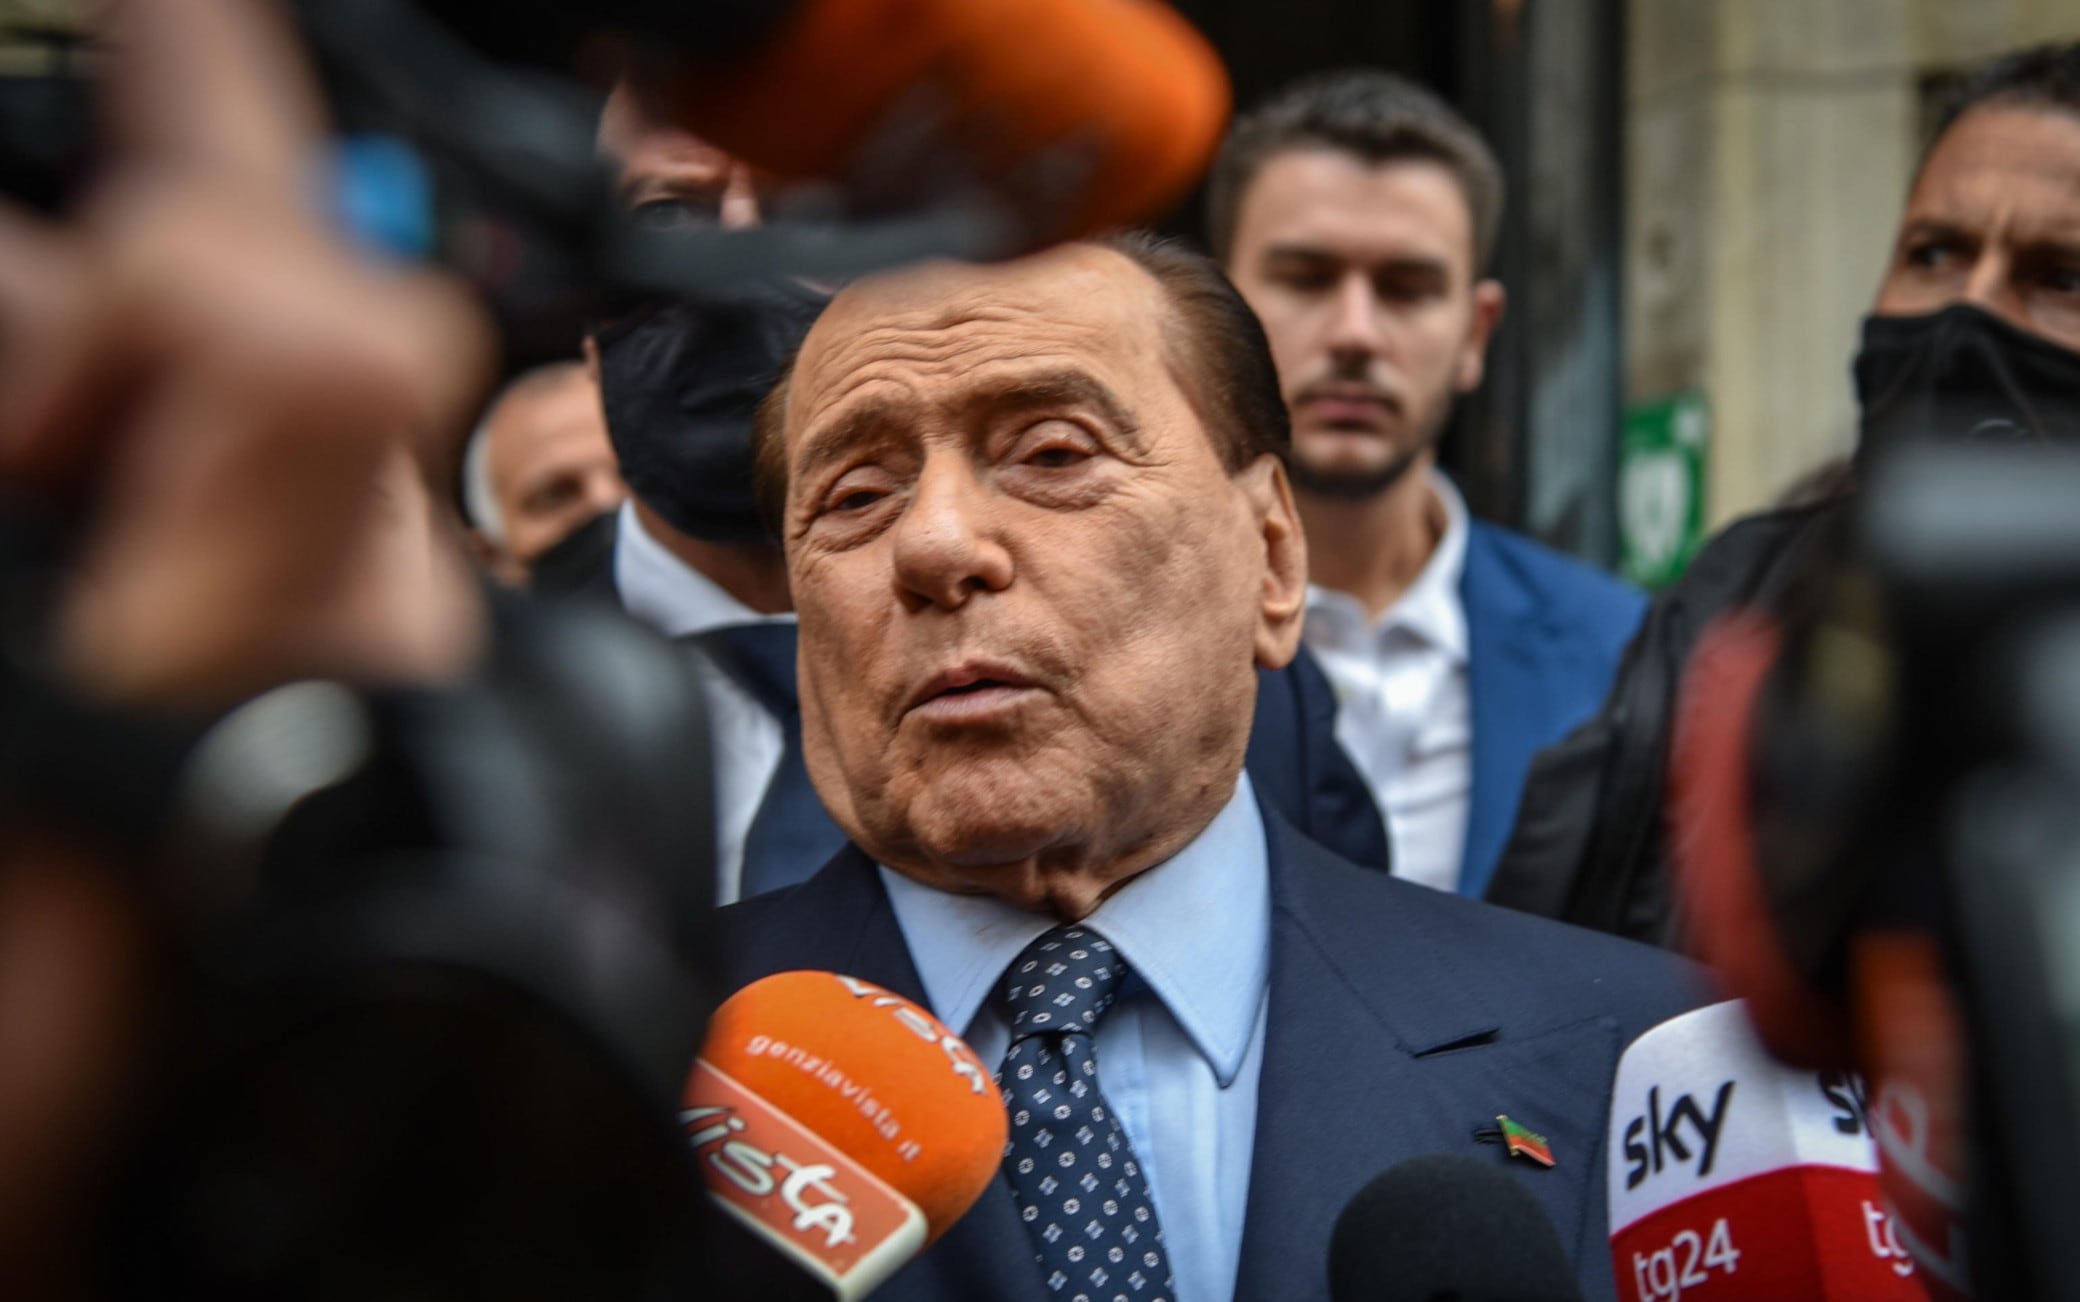 Berlusconi on the early vote: “It would be irresponsible to interrupt the government”